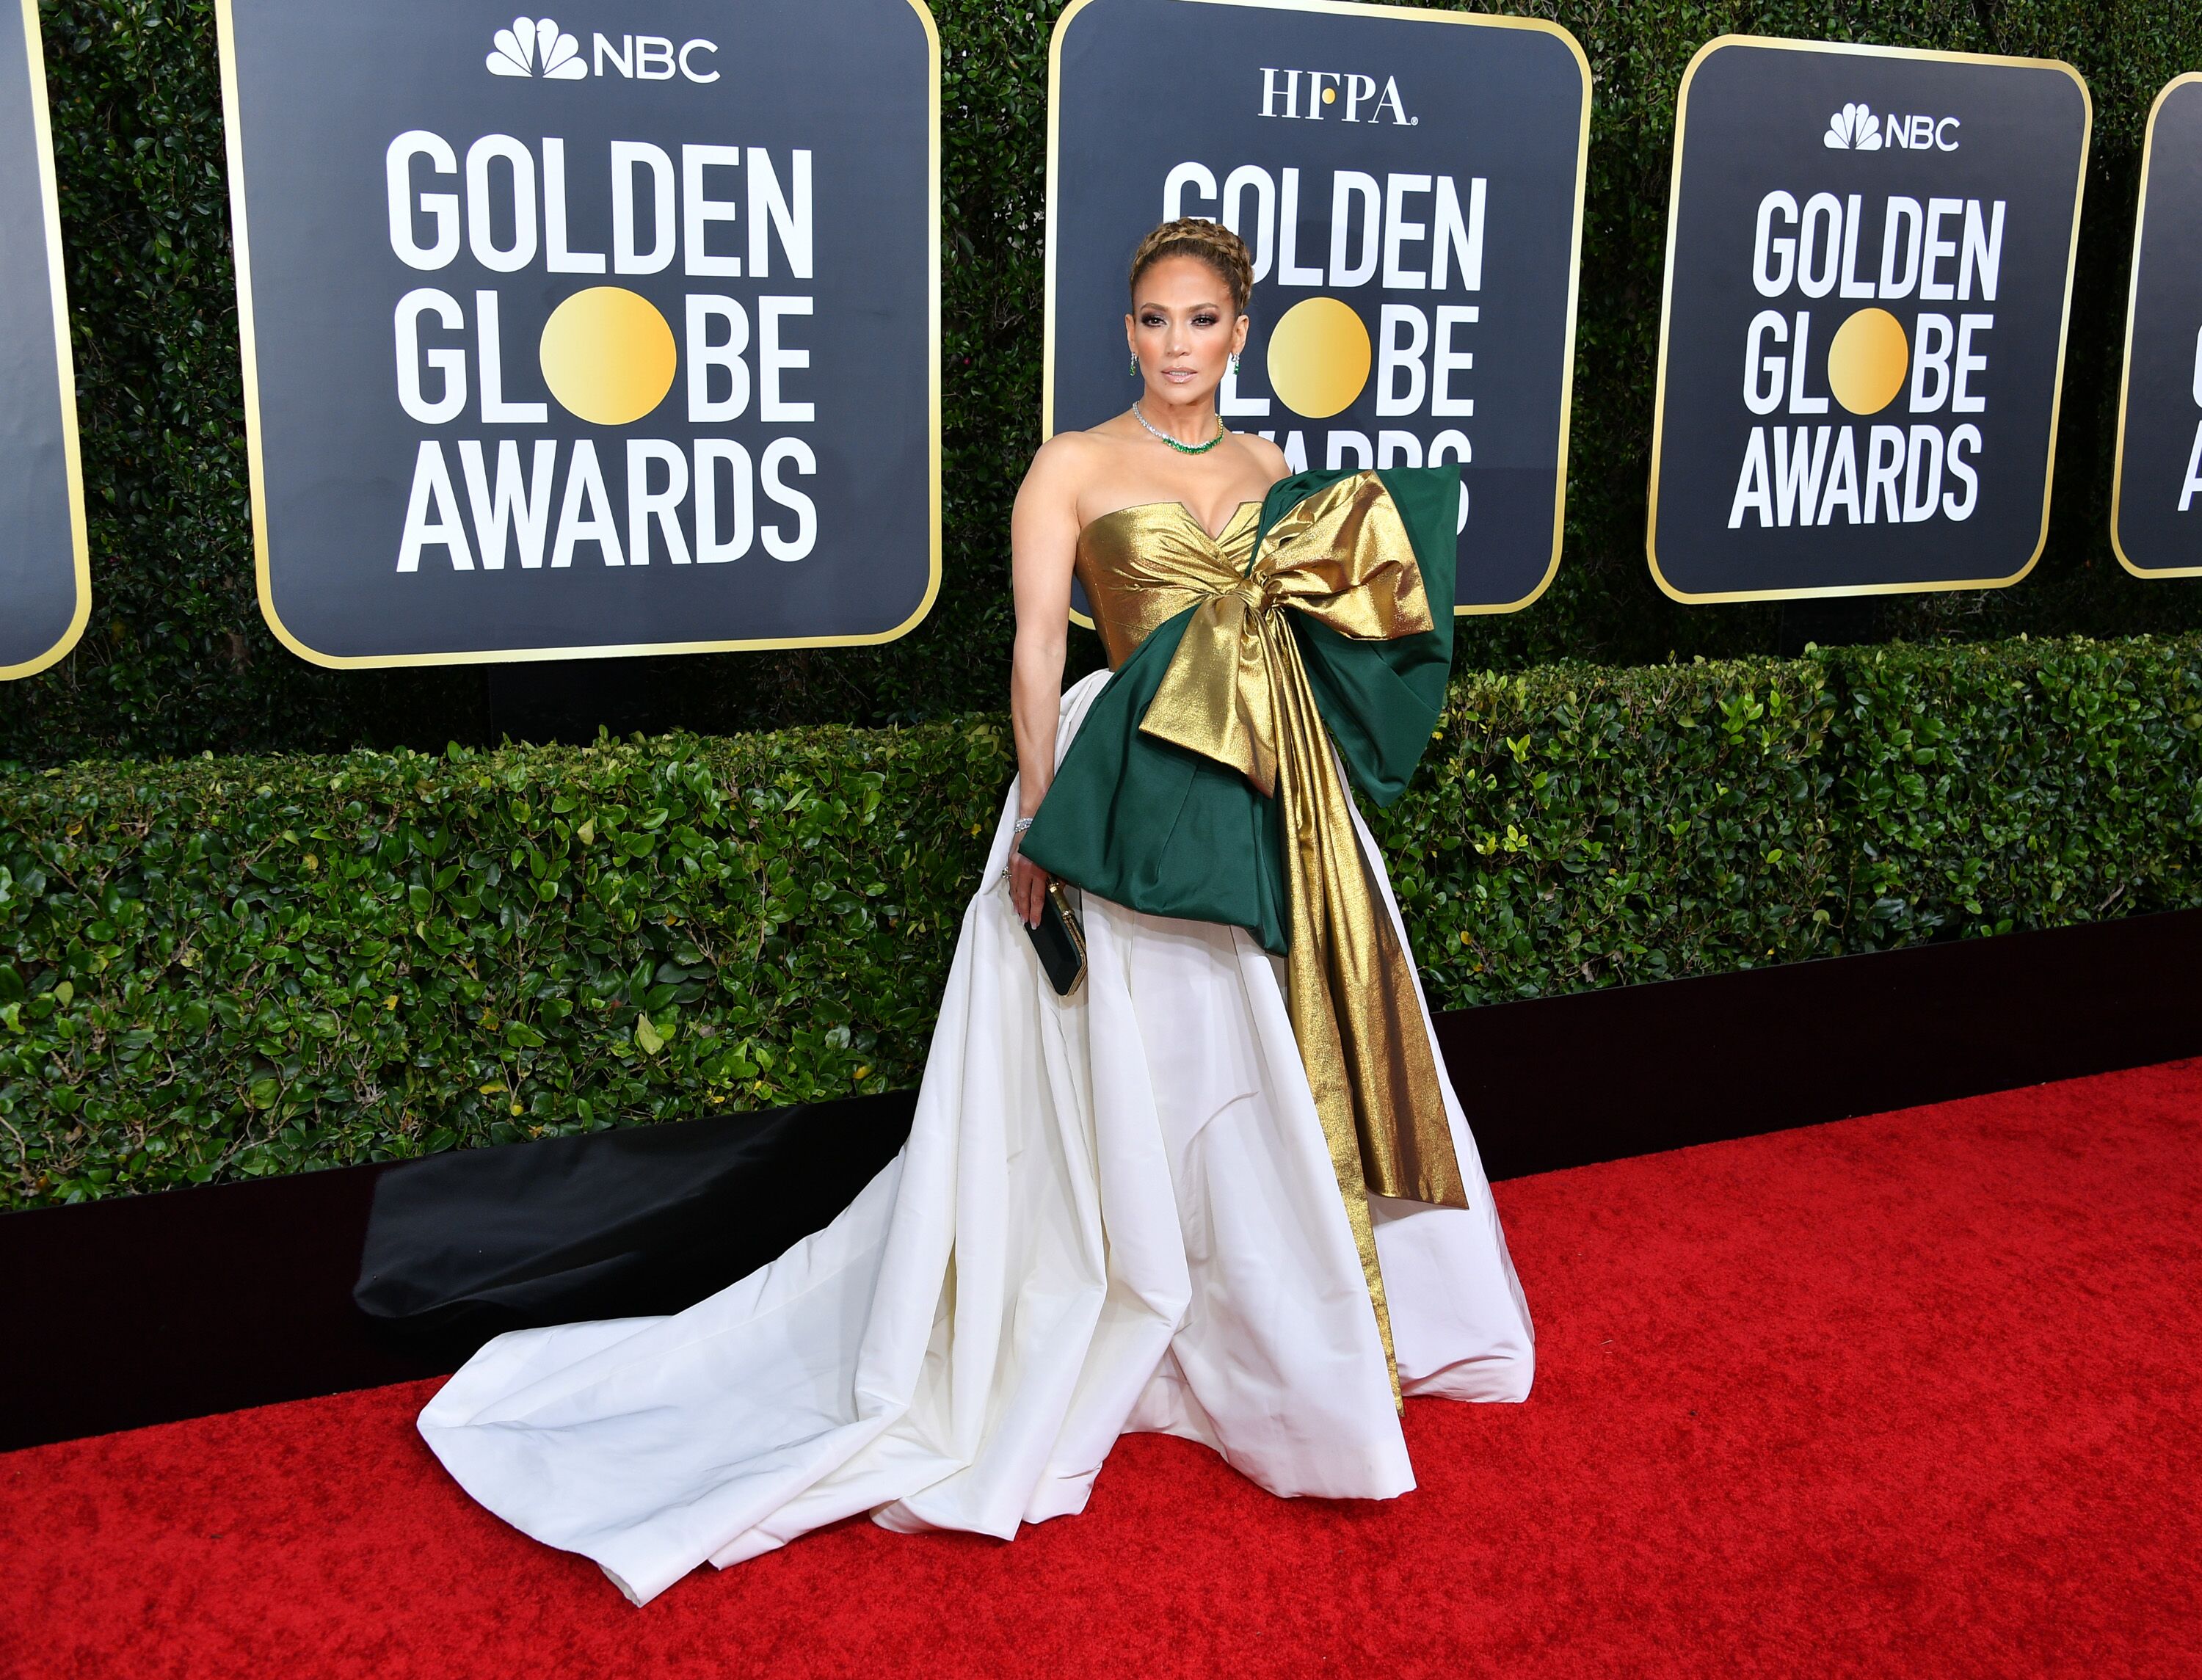 Jennifer Lopez at the 77th Annual Golden Globe Awards on January 05, 2020. | Photo: George Pimentel/Getty Images